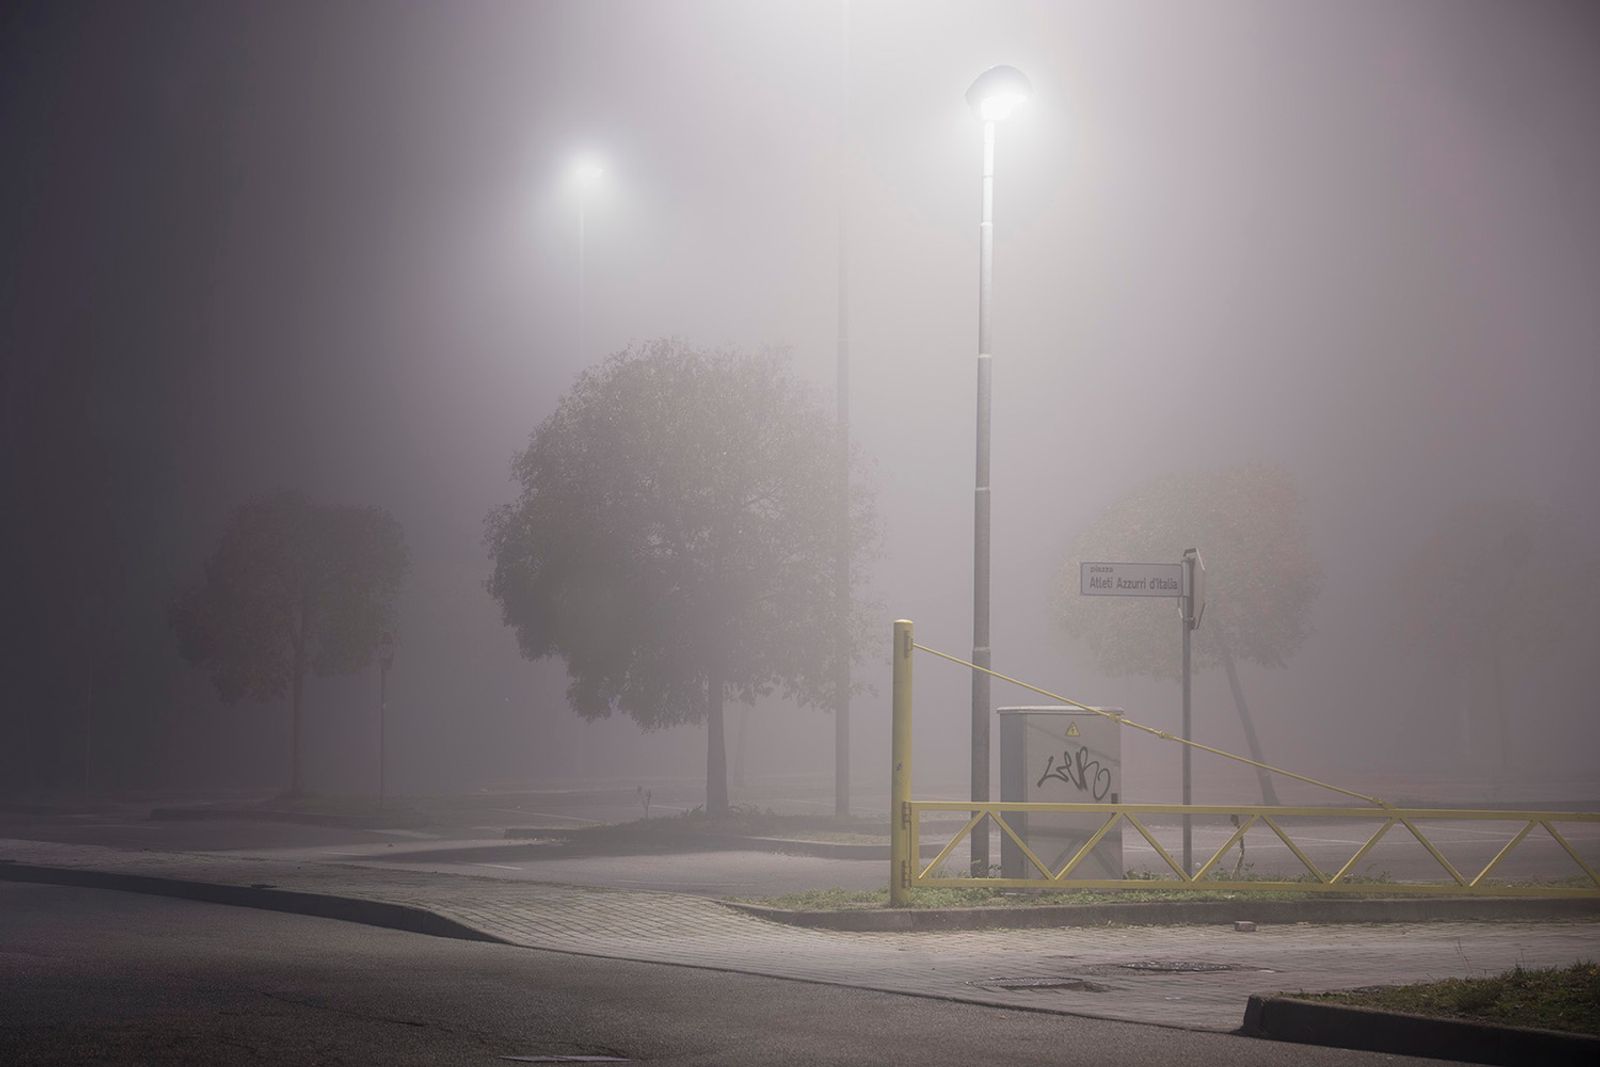 © Gianluca Attoli - Image from the Suburban Base photography project